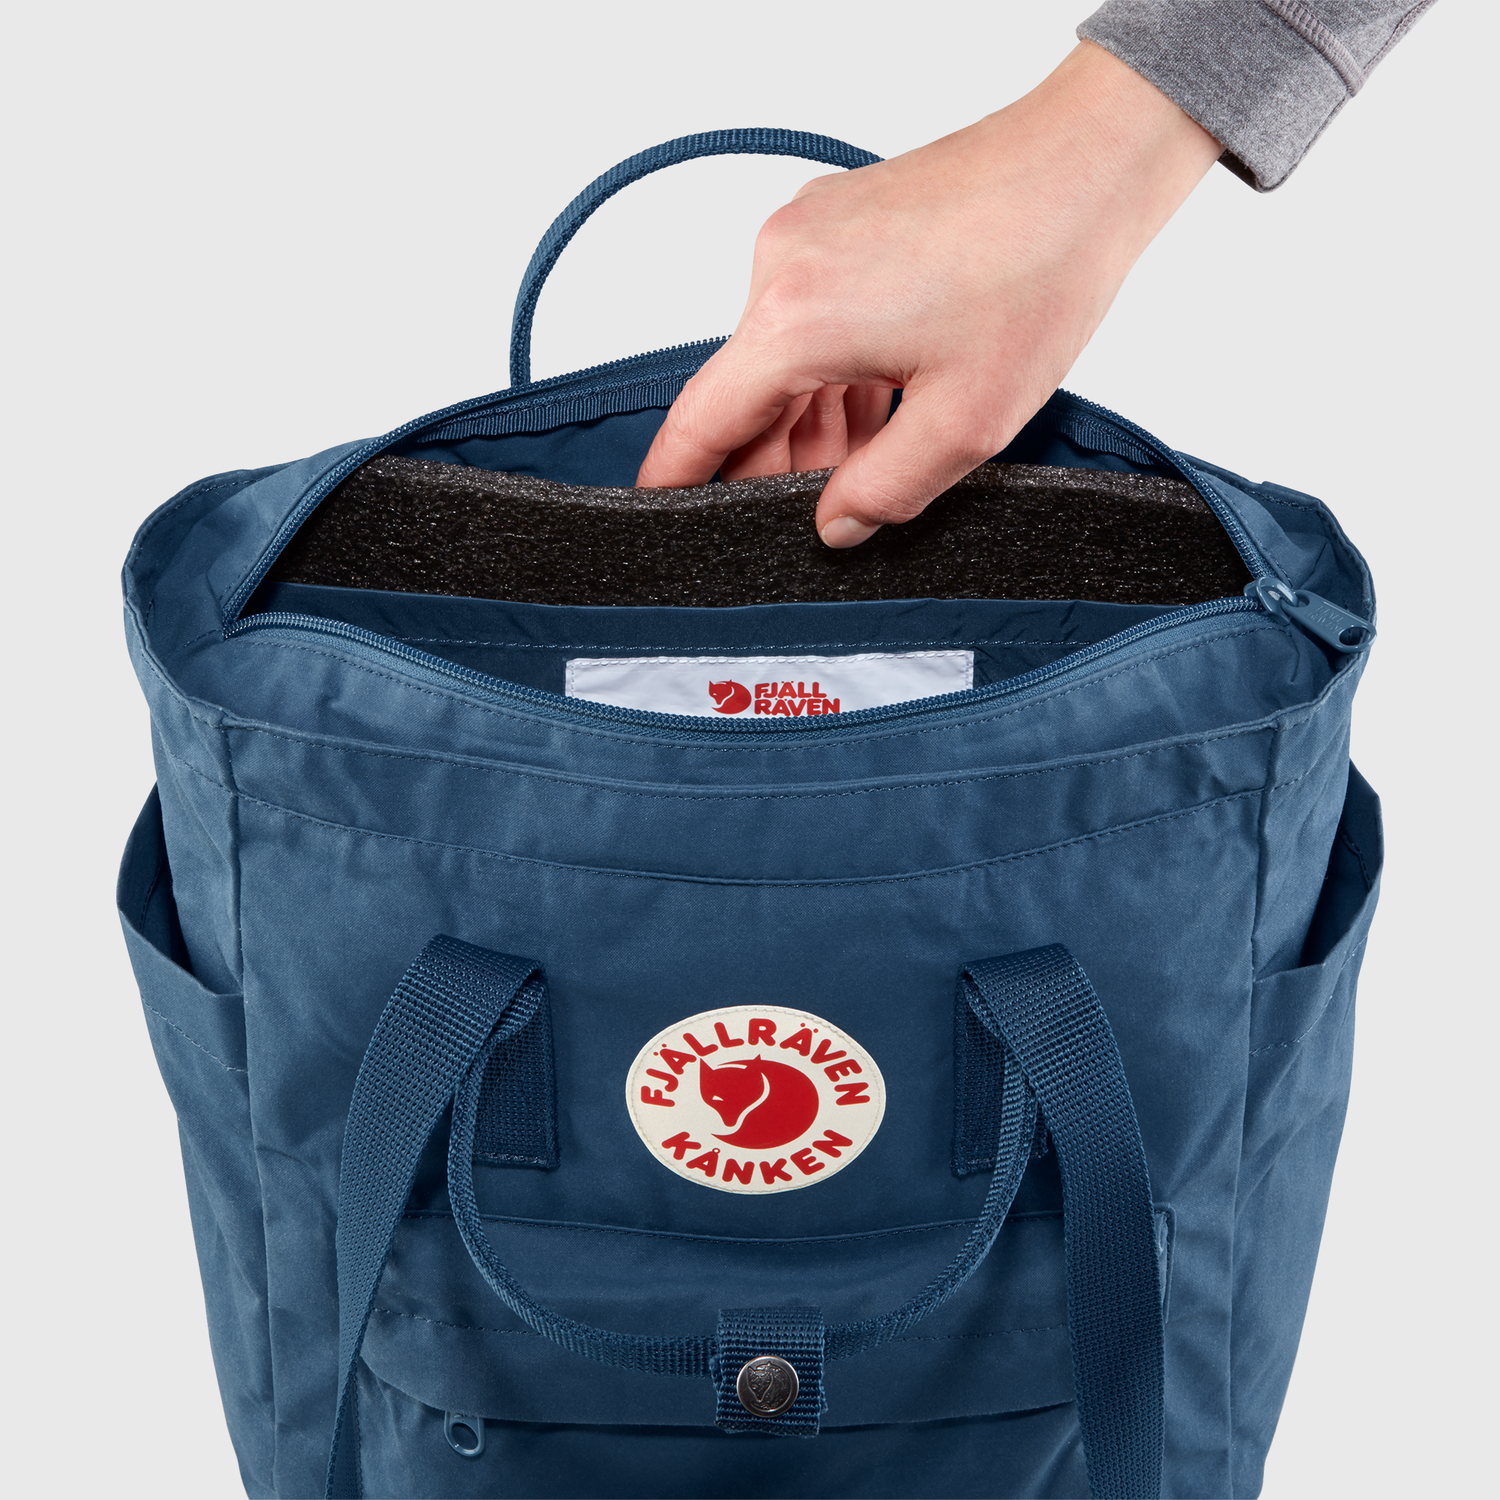 does kanken totepack has a seatpad?